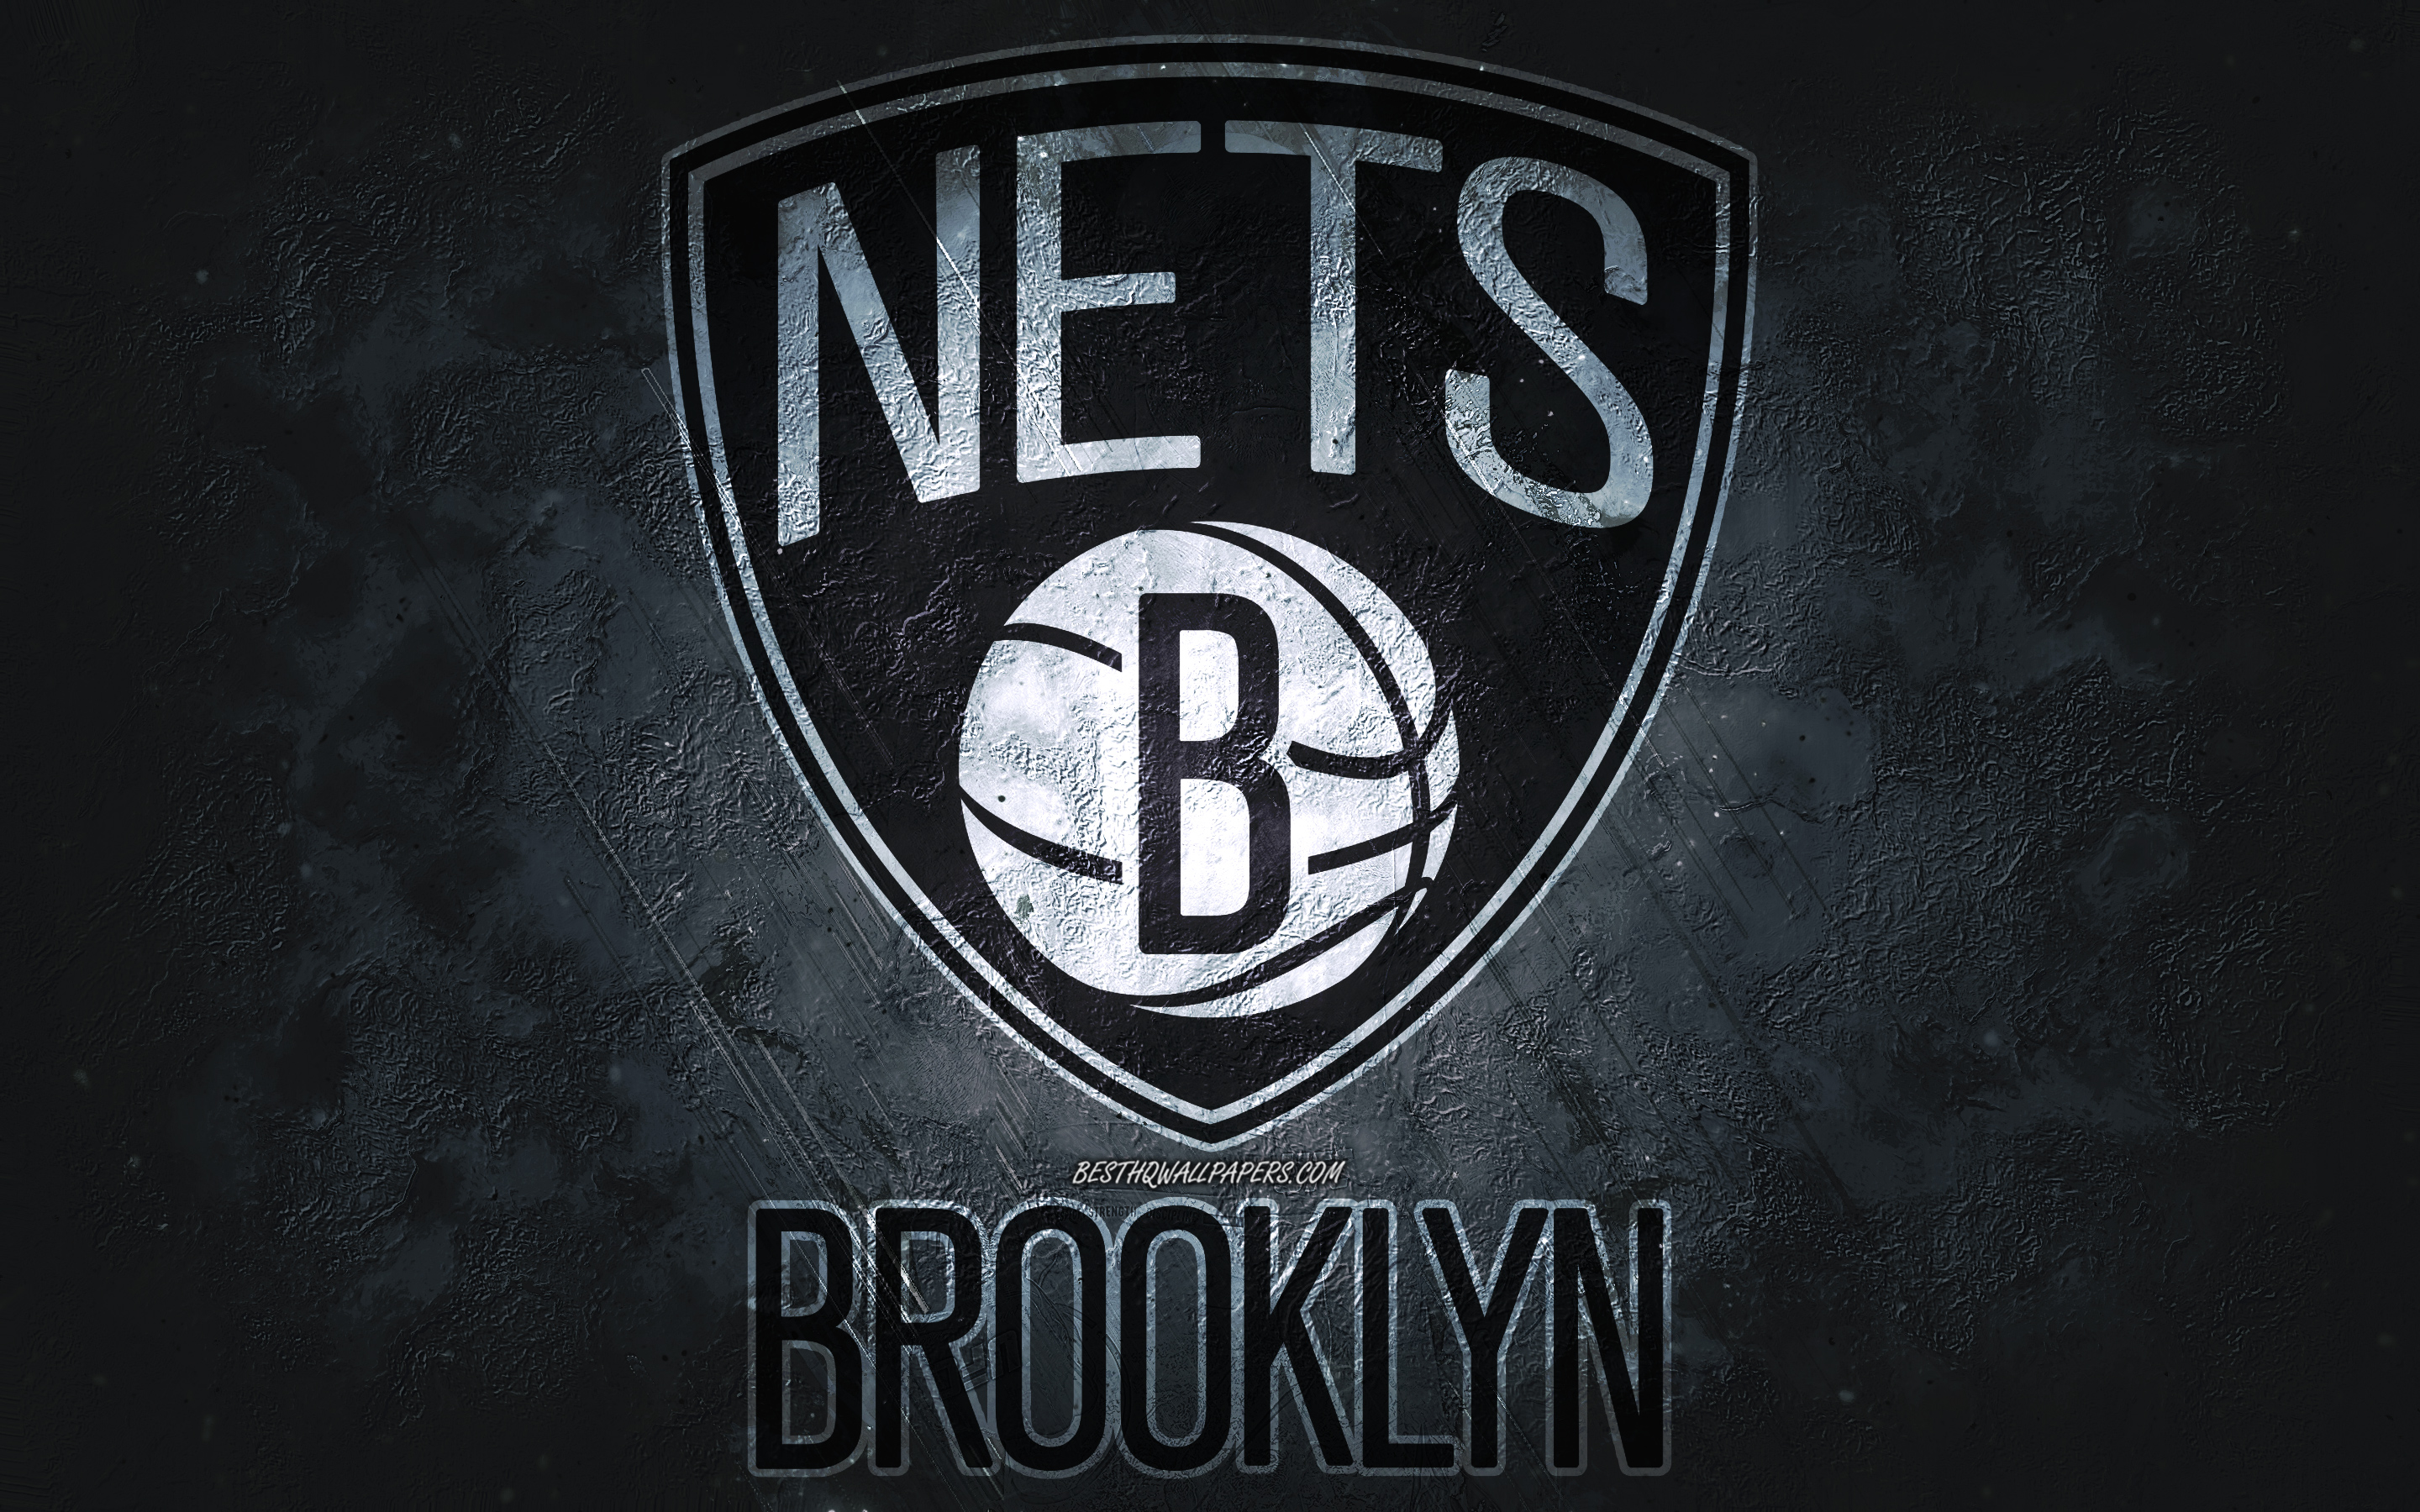 Download wallpaper Brooklyn Nets, American basketball team, black stone background, Brooklyn Nets logo, grunge art, NBA, basketball, USA, Brooklyn Nets emblem for desktop with resolution 2880x1800. High Quality HD picture wallpaper